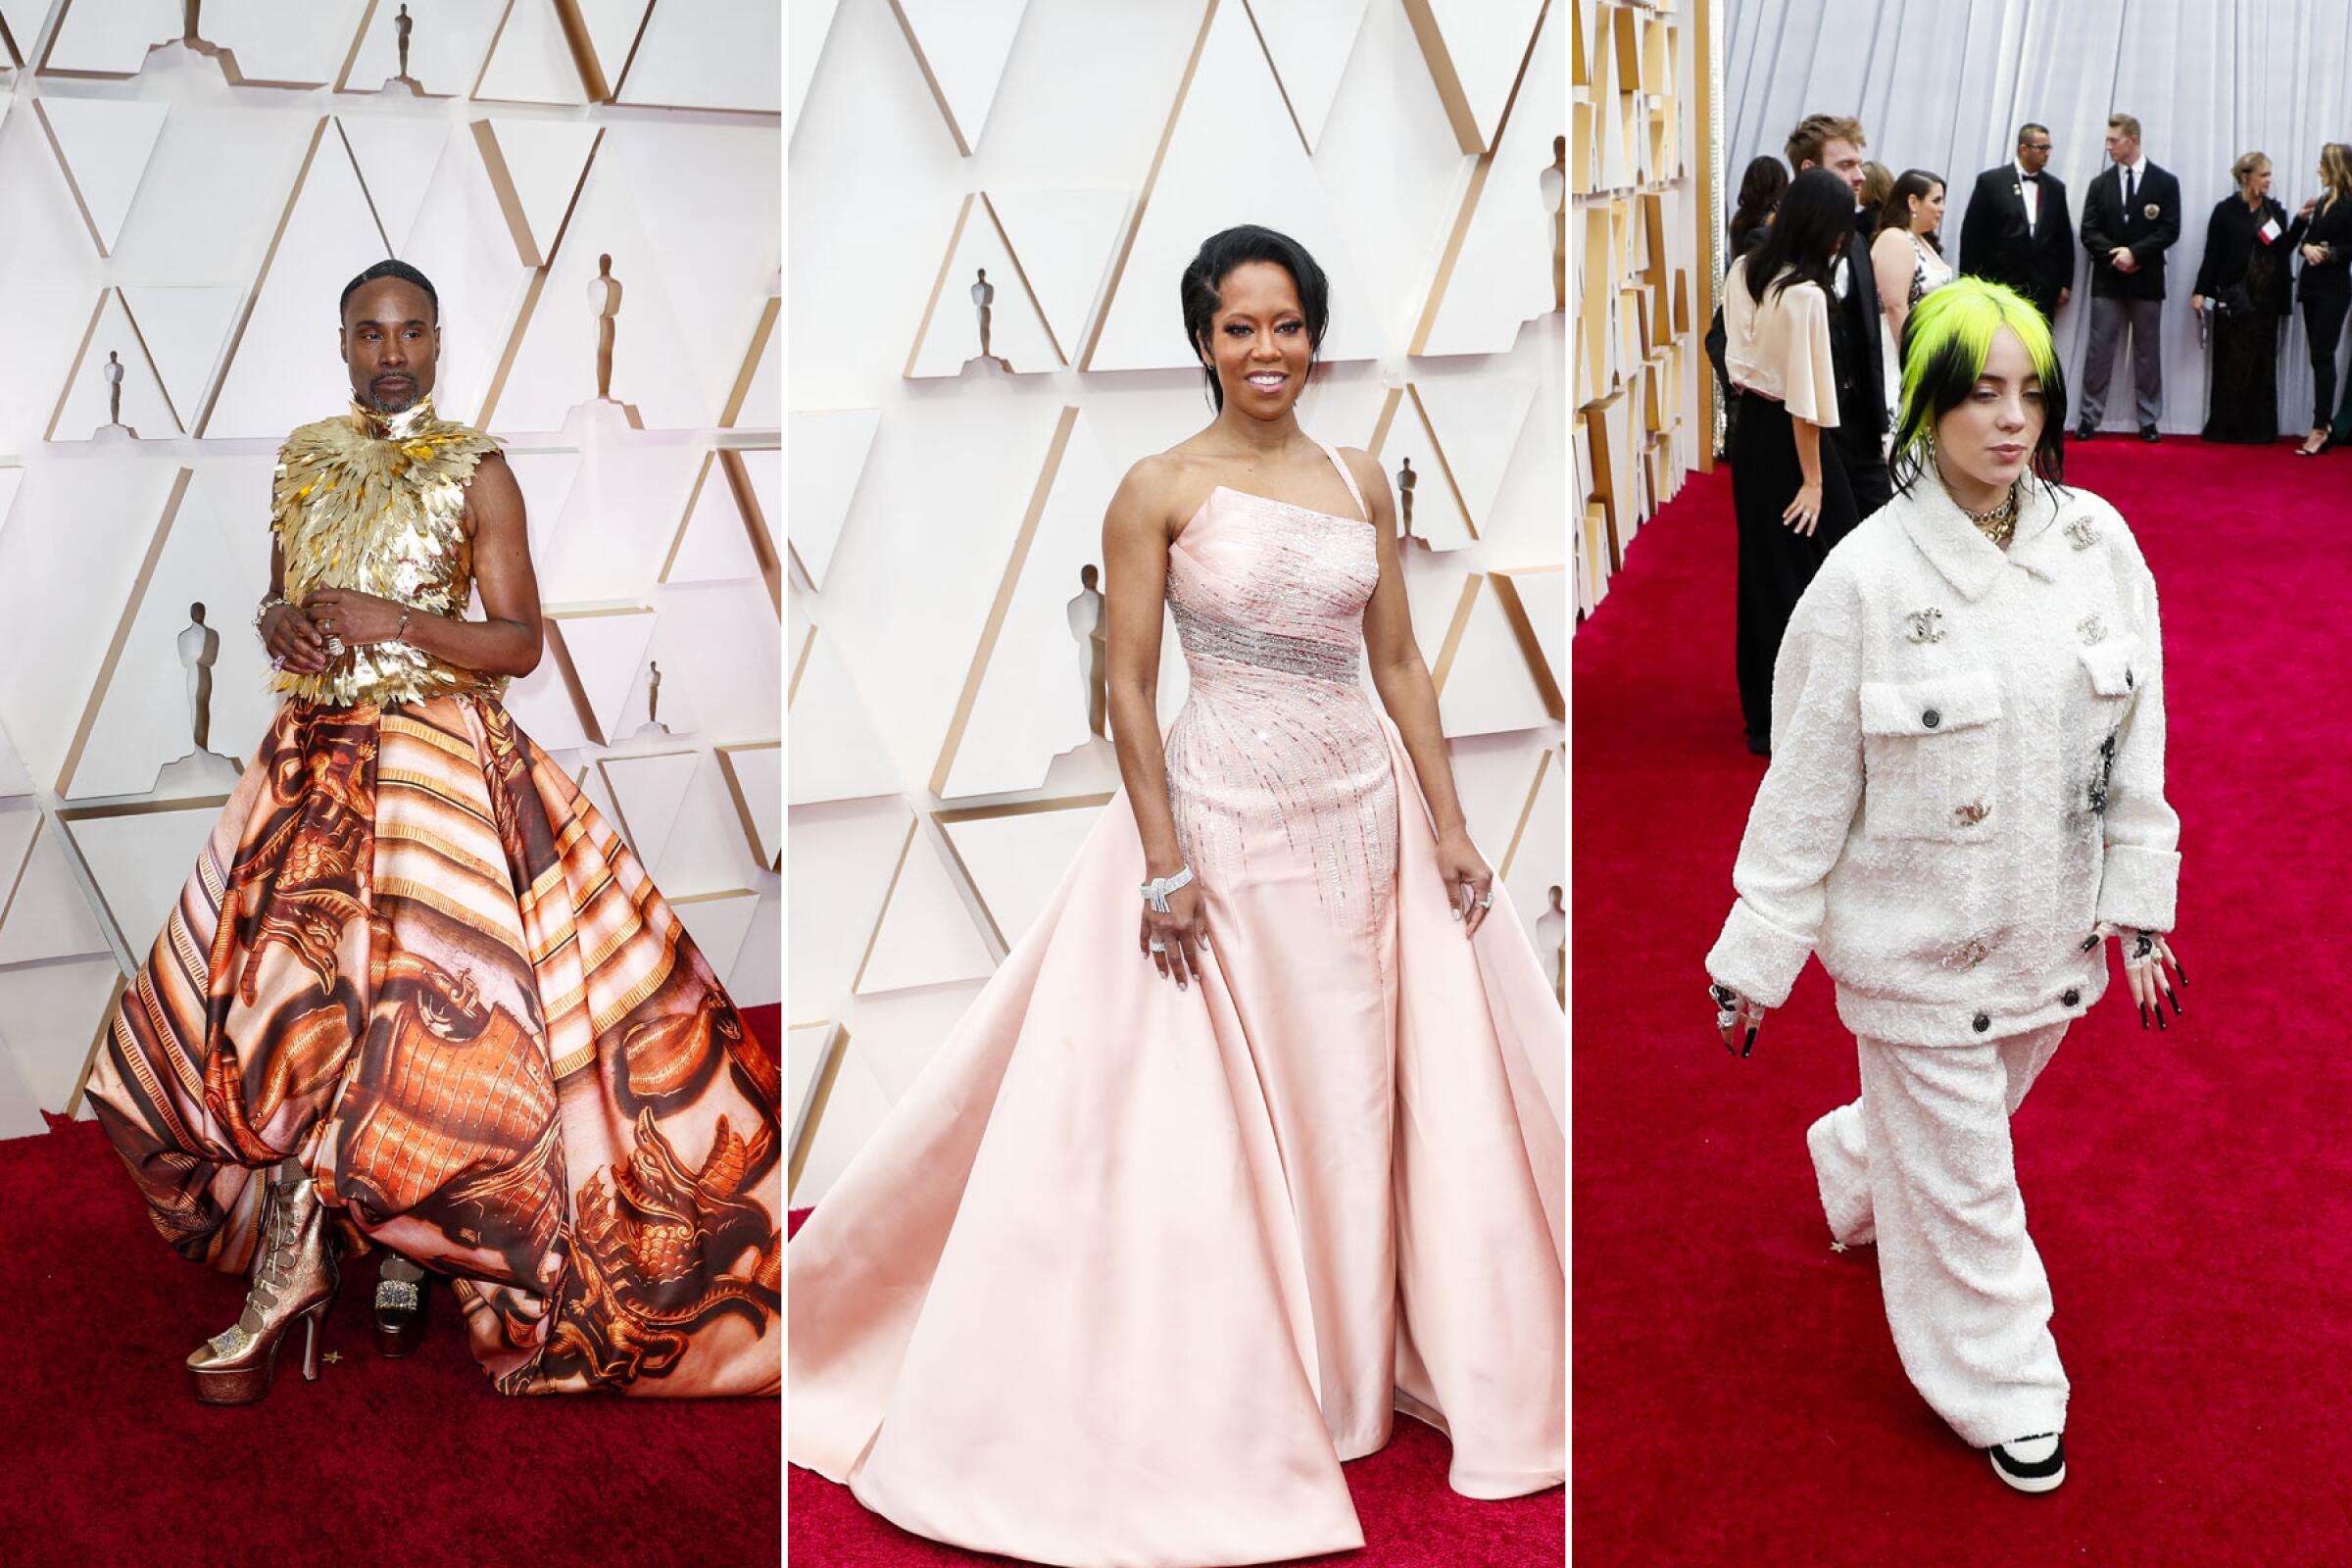 Shots of Billy Porter, from left, Regina King and Billie Eilish on the red carpet.